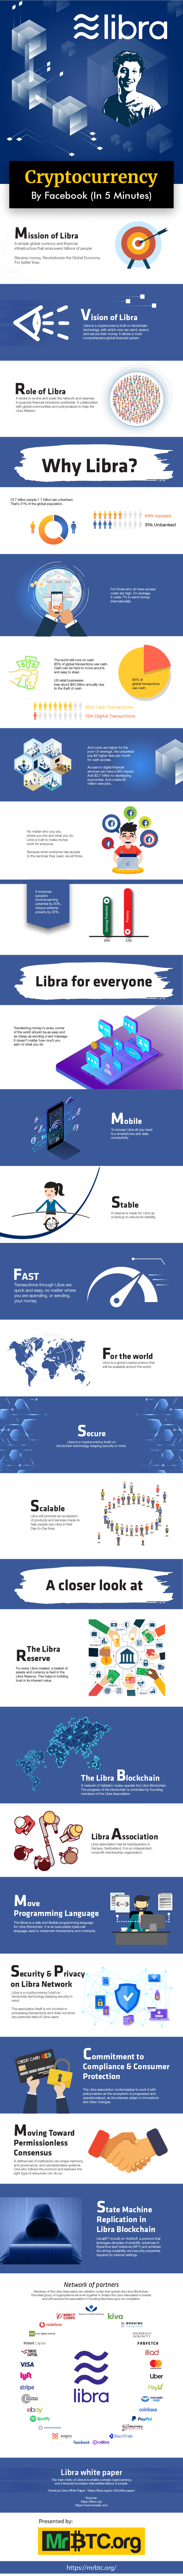 Infographic: What Is Libra? All You Need to Know About Facebook's New Cryptocurrency. What Is The Libra Association? Do People Trust New Facebook's Cryptocurrency? Are You Willing to Invest in Libra the Cryptocurrency by Facebook?